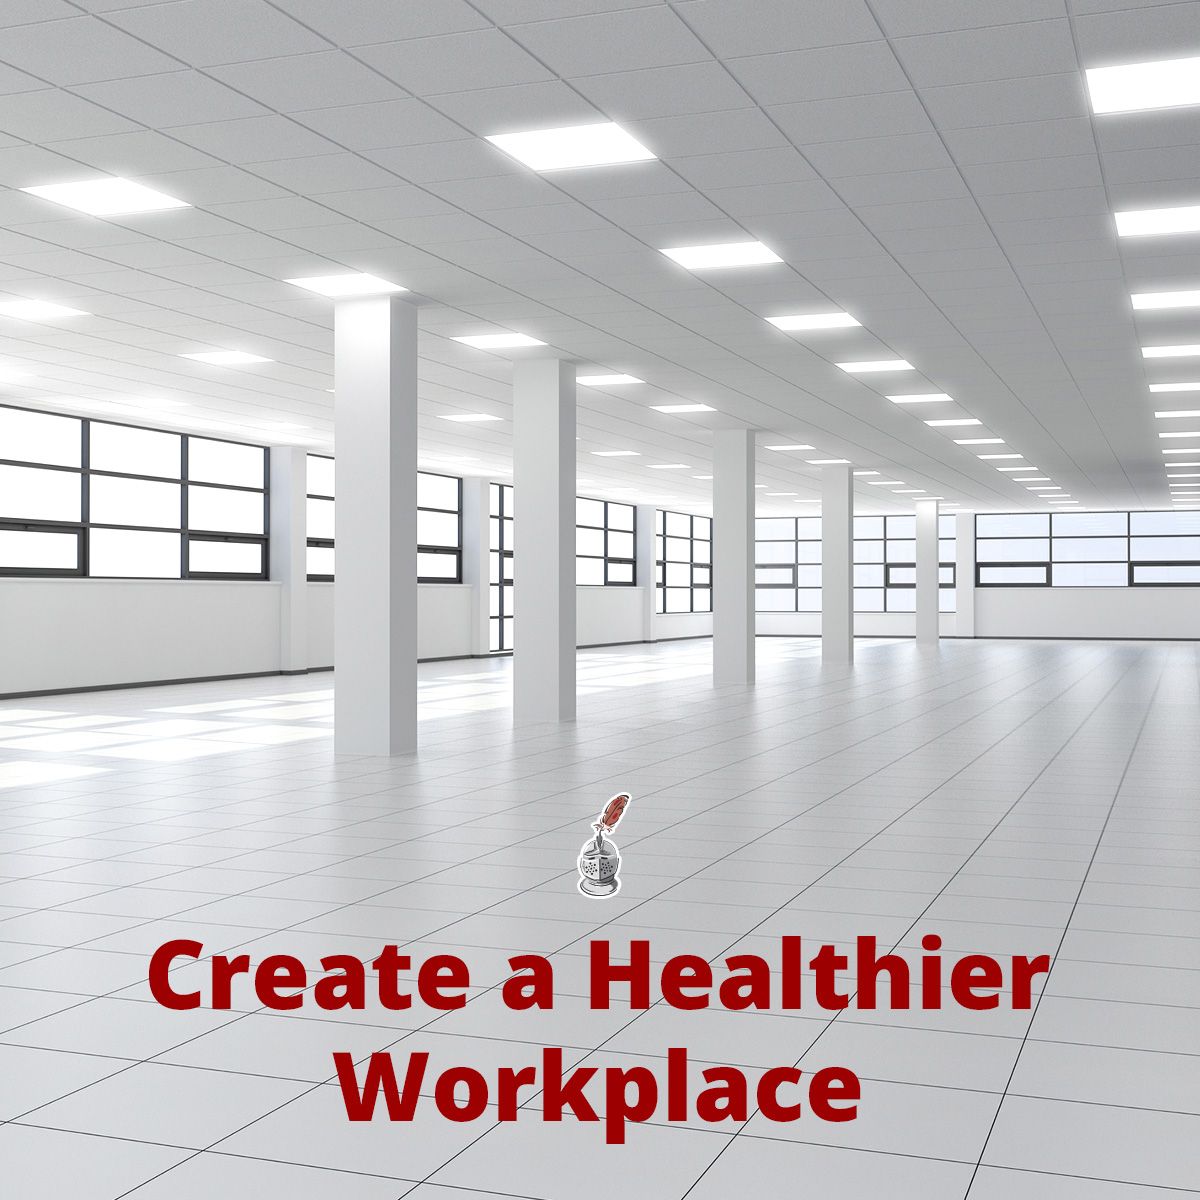 Create a Healthier Workplace